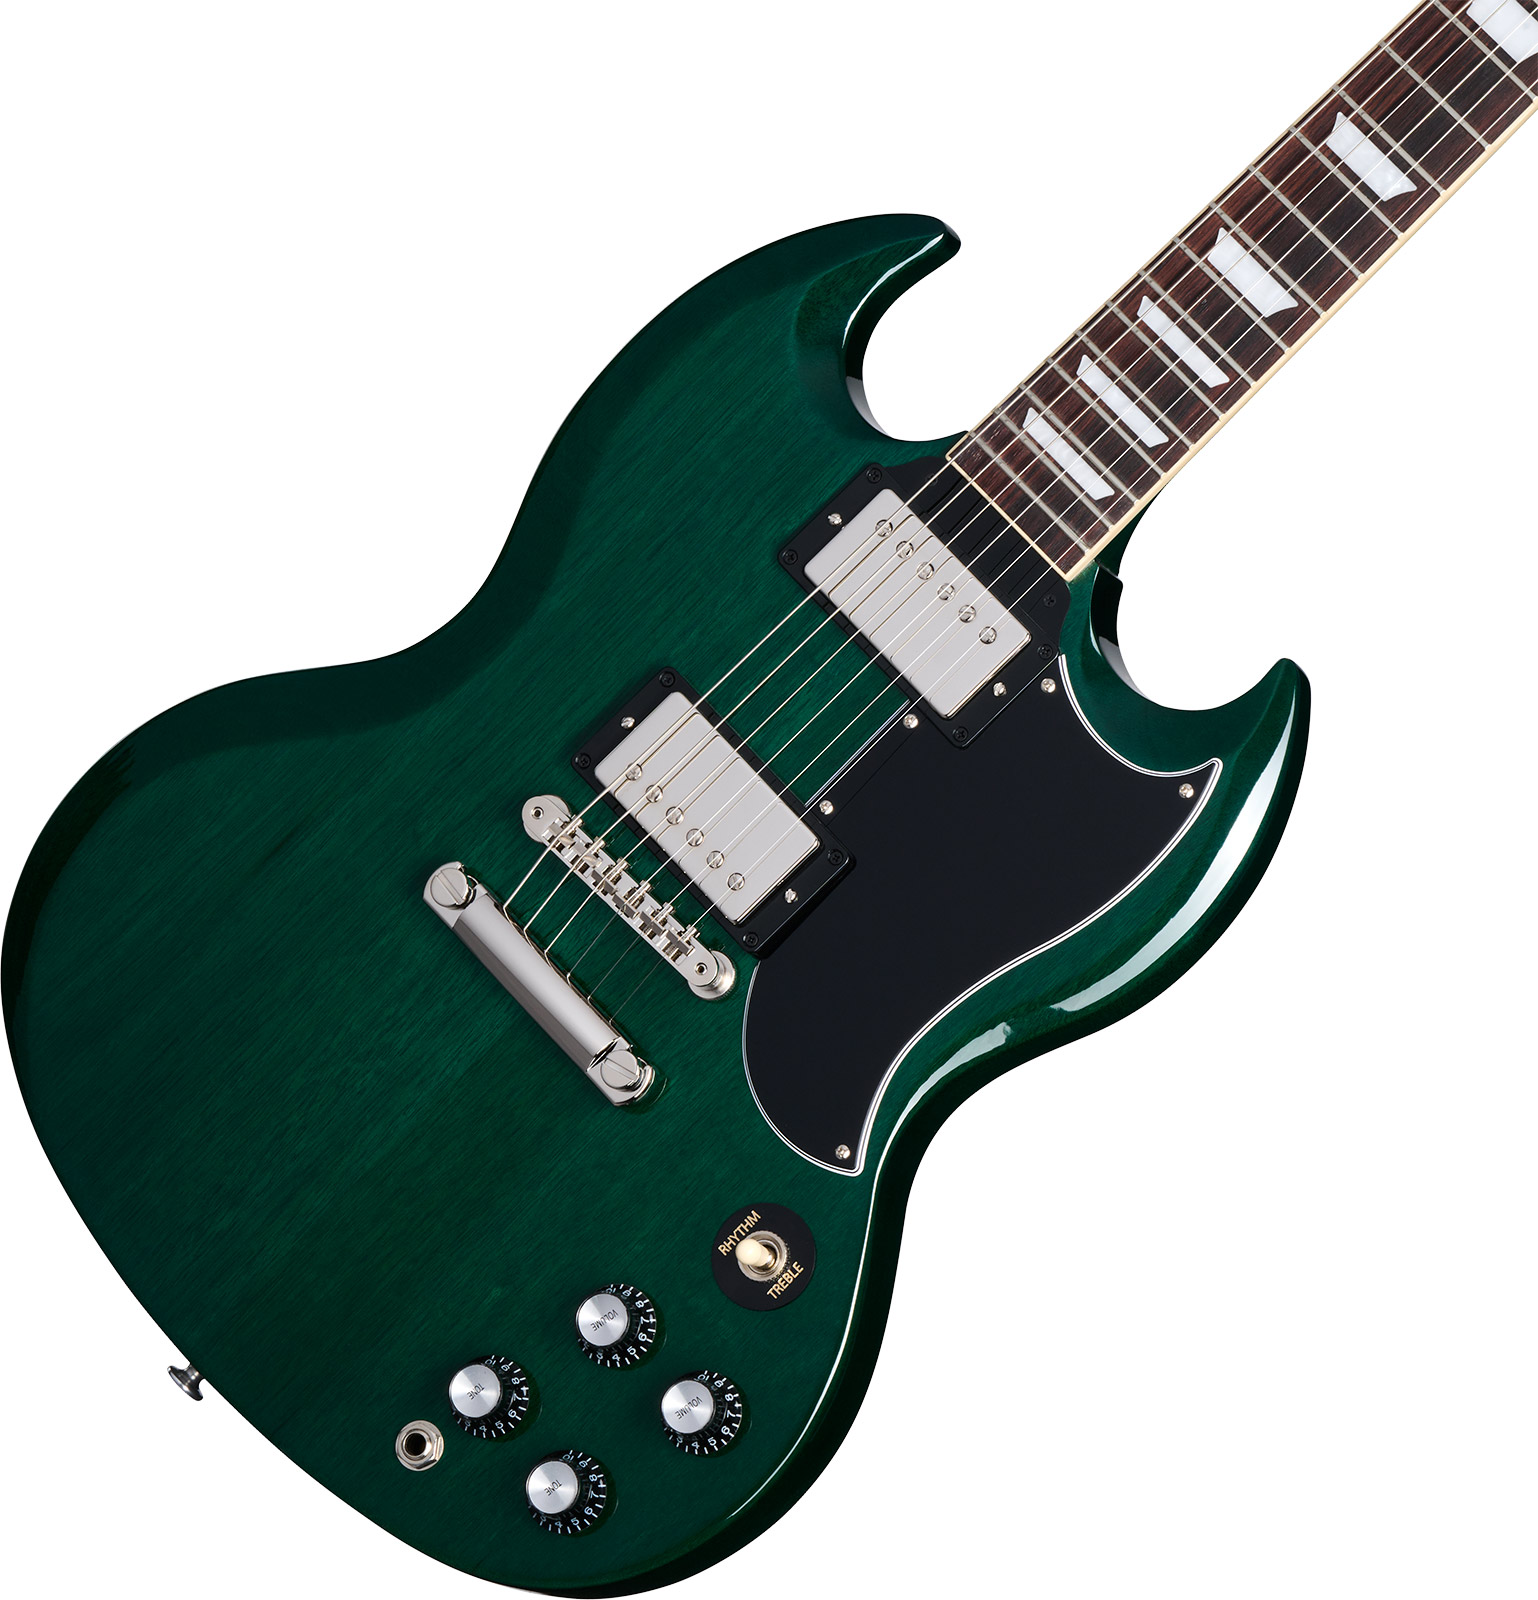 Gibson Sg Standard 1961 Custom Color 2h Ht Rw - Translucent Teal - Double cut electric guitar - Variation 3